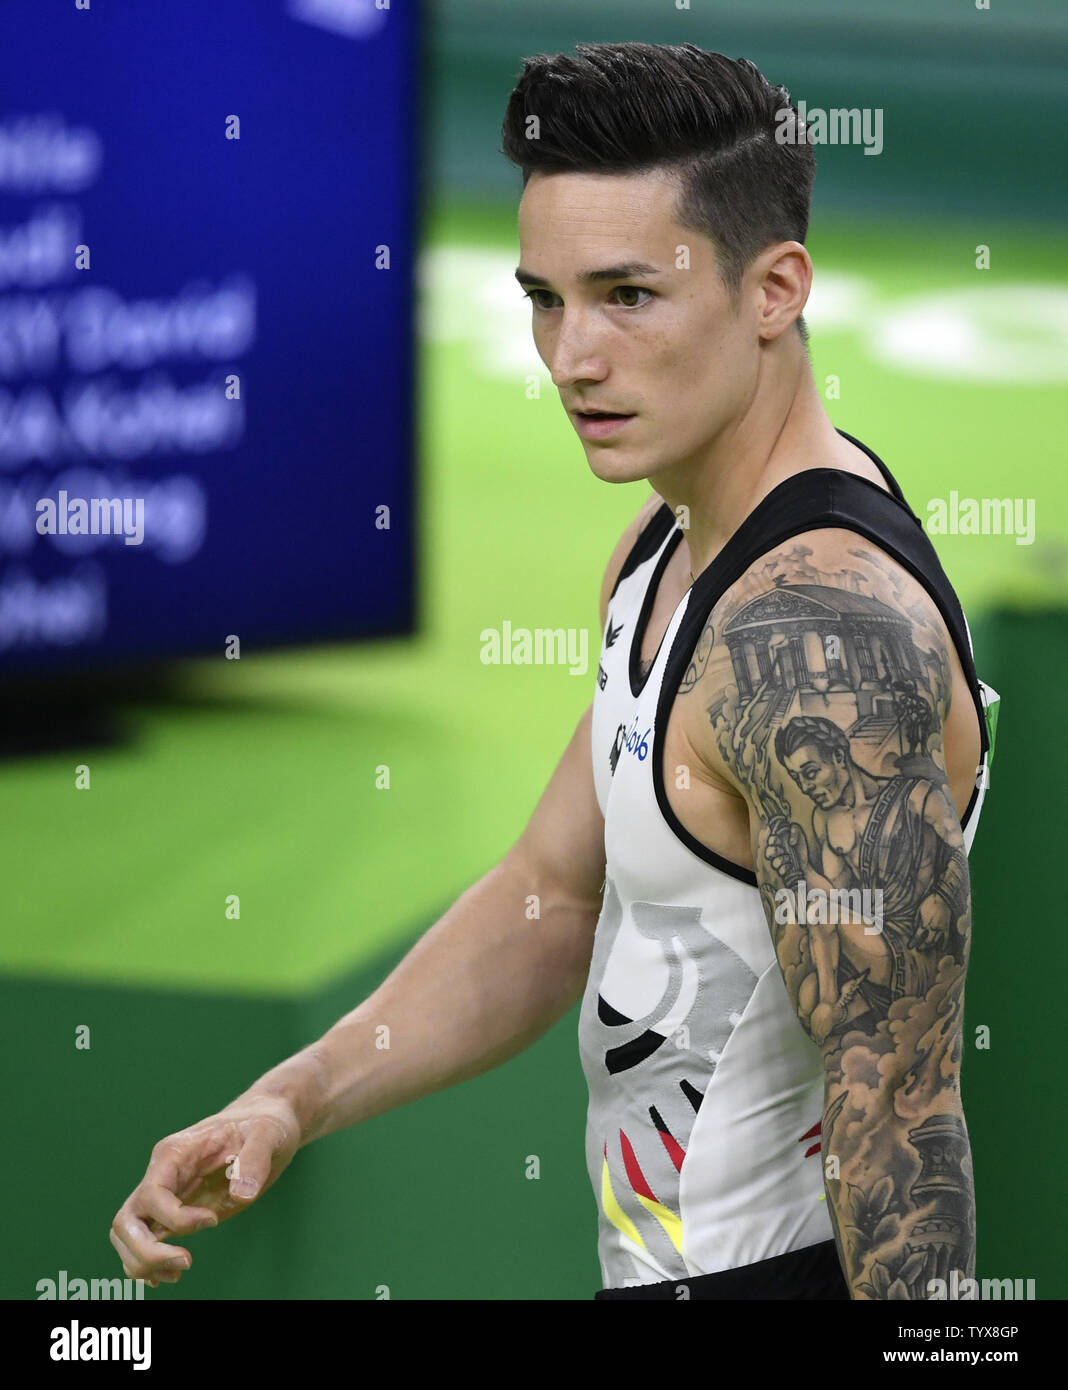 German gymnast Marcel Nguyen sports a 'sleeve' tattoo of an ancient Greek Olympic figure on his arm as he awaits the start of the Men's Artistic Gymnastics Individual All-Around Finals of the 2016 Rio Summer Olympics in Rio de Janeiro, Brazil, August 10, 2016.          Photo by Mike Theiler/UPI Stock Photo